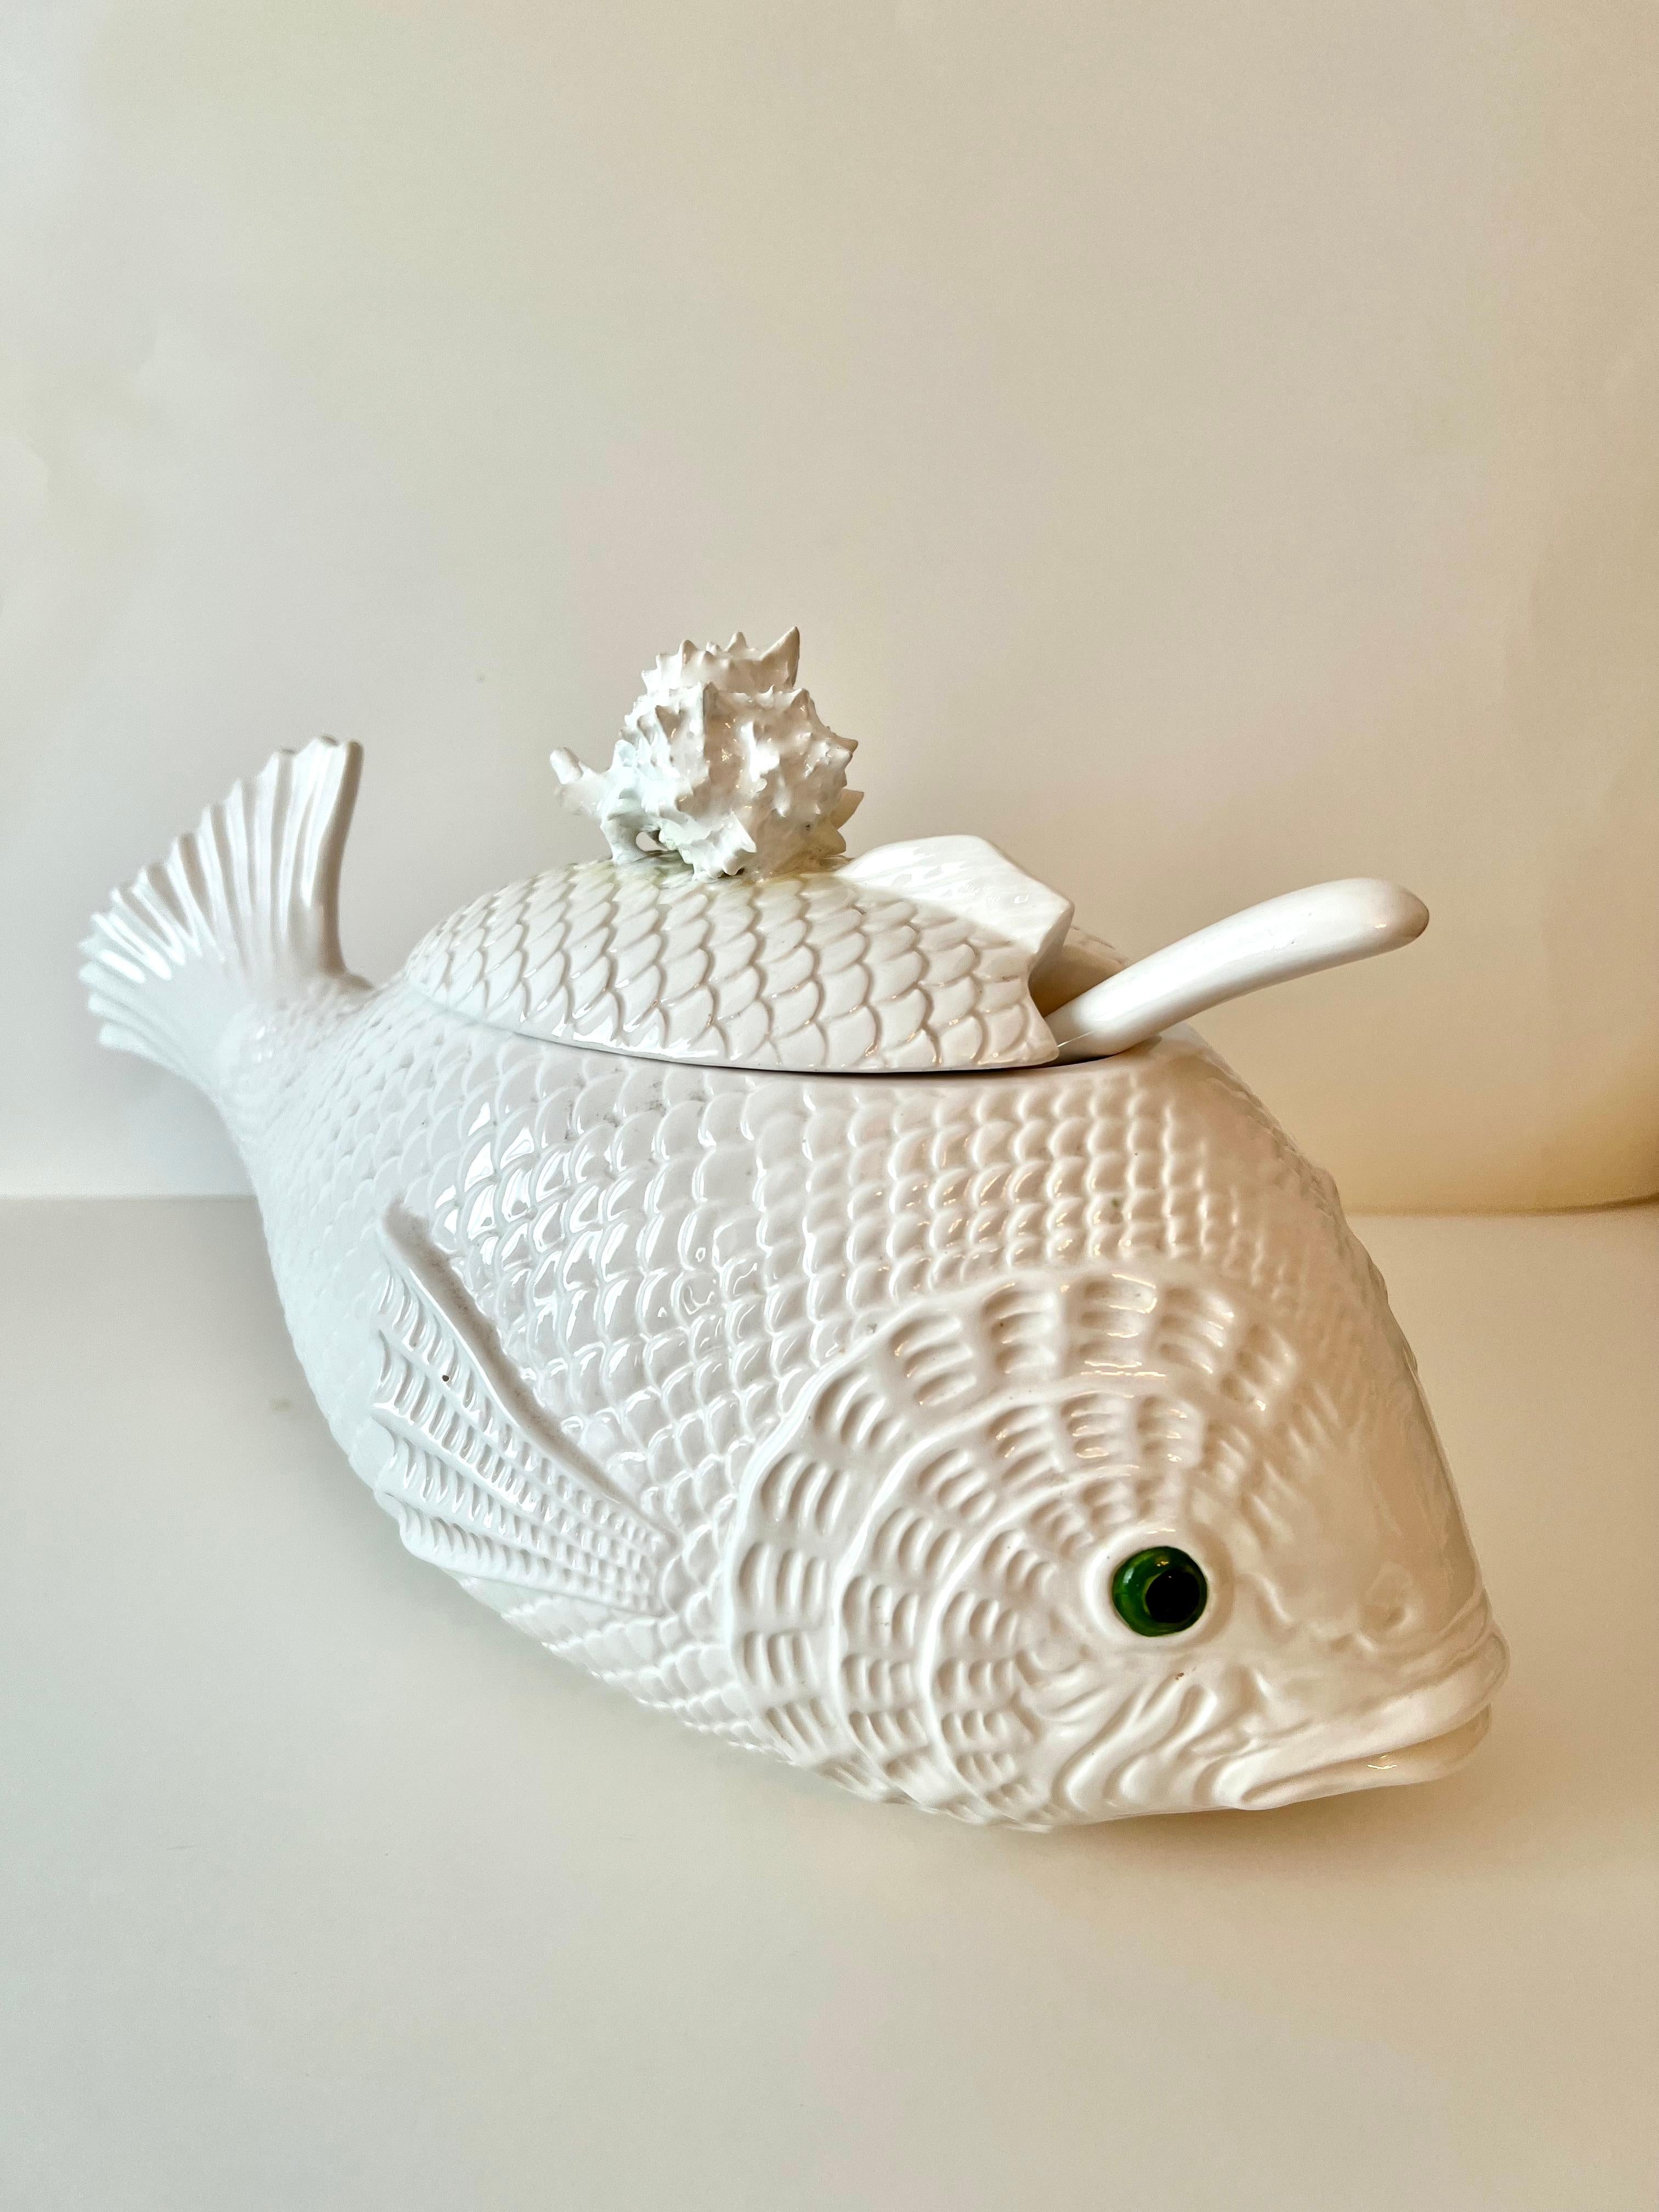 A unique soup tureen by Fitz and Floyd in the shape of a fish.. nice attention to details of scales, fins and eyes.. with a newly added shell lid opener that matches perfectly. All pieces in good condition with no chips or cracks.

The Tureen is